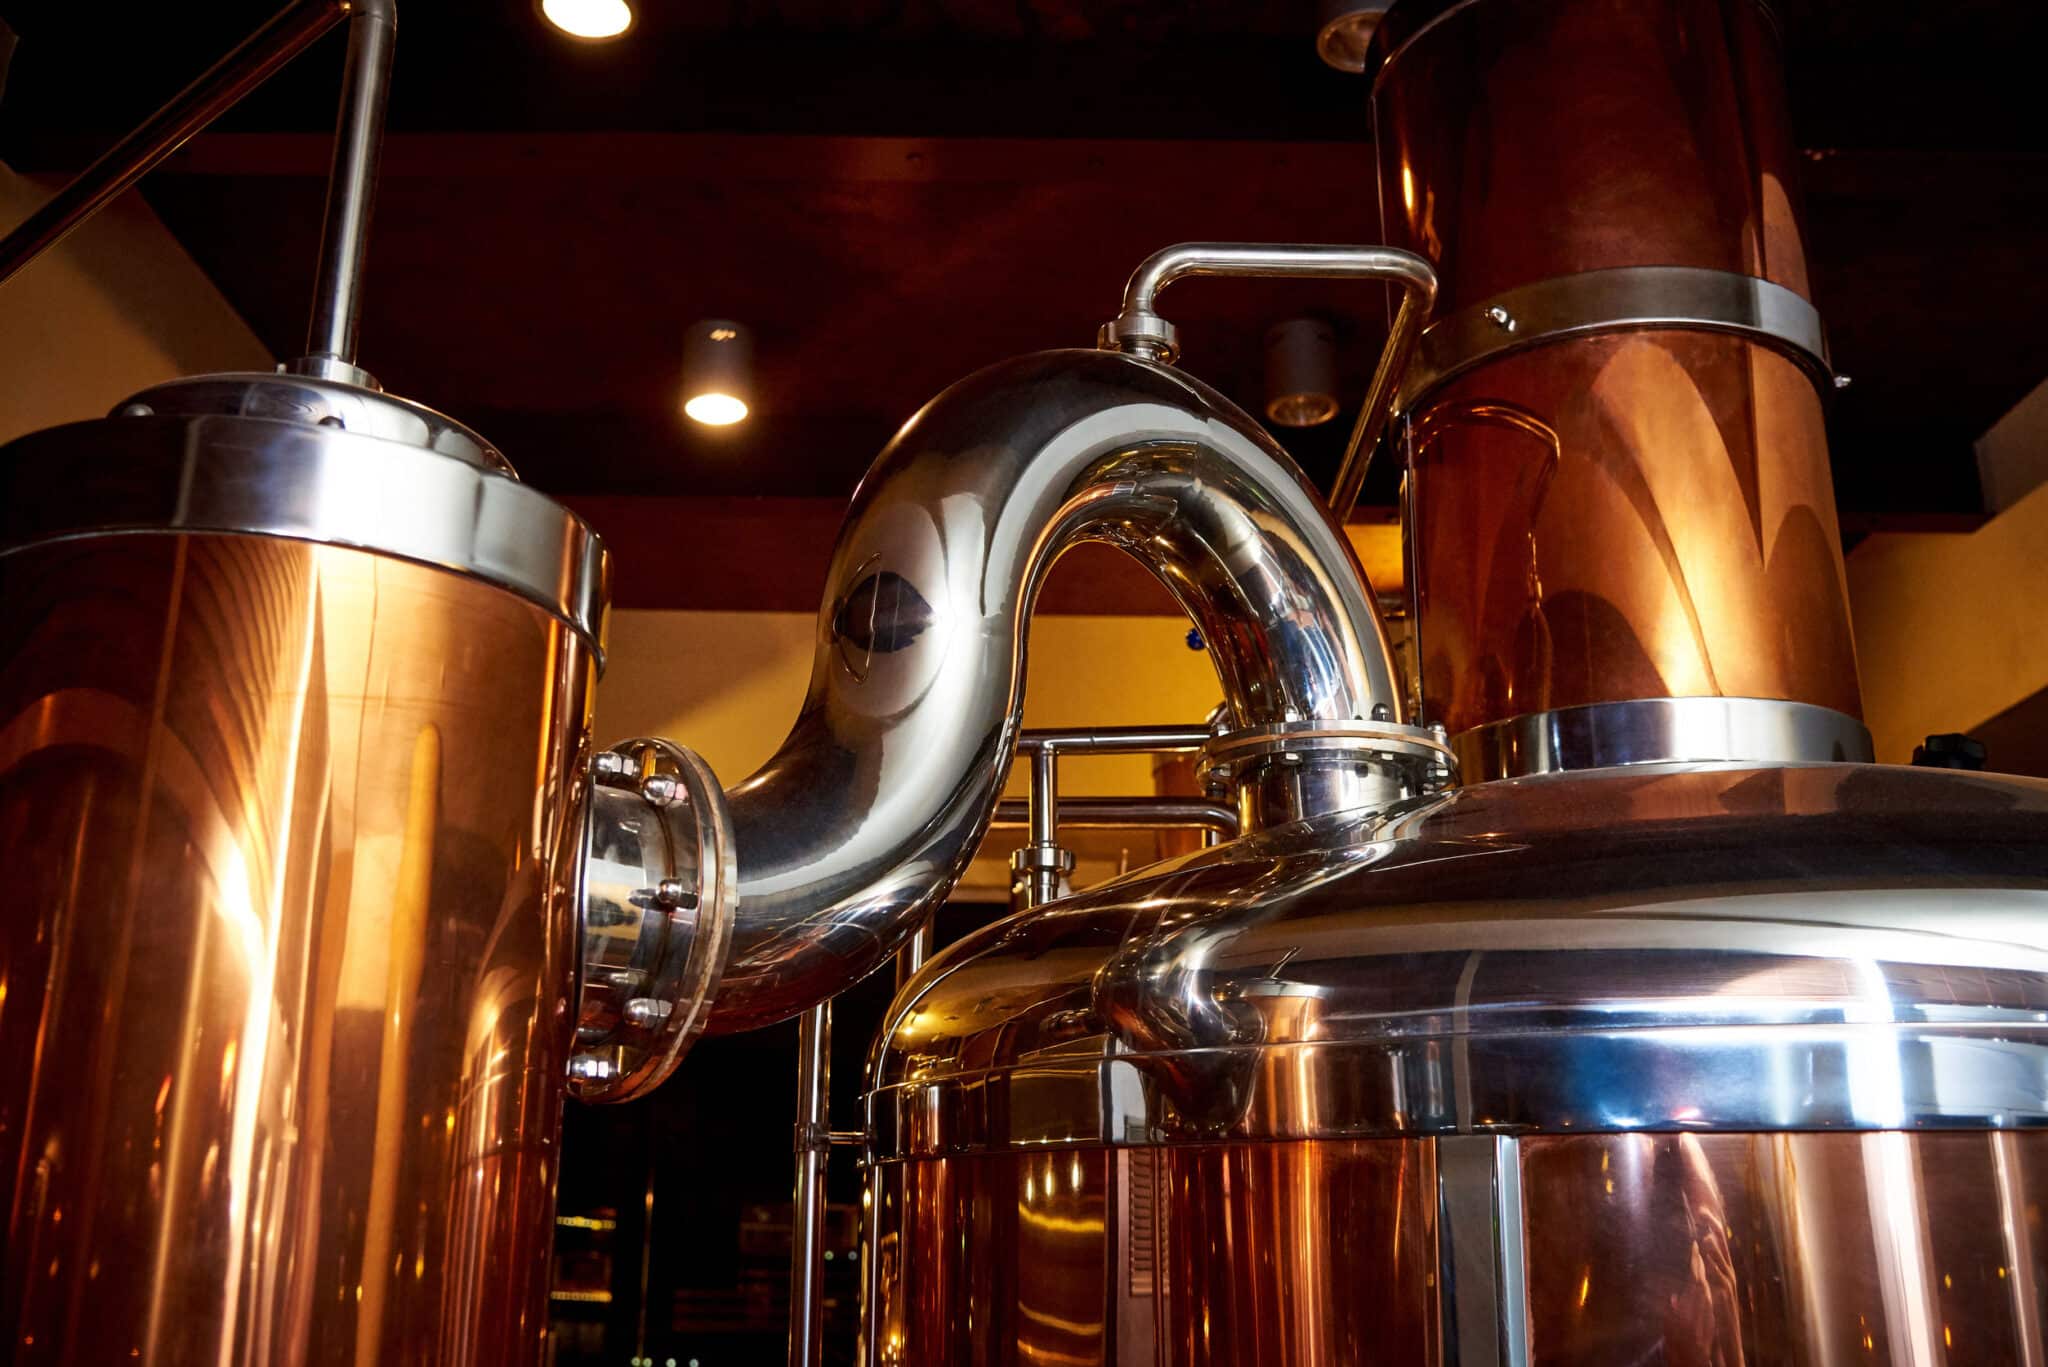 Breweries are eligibility for R&D Tax Relief